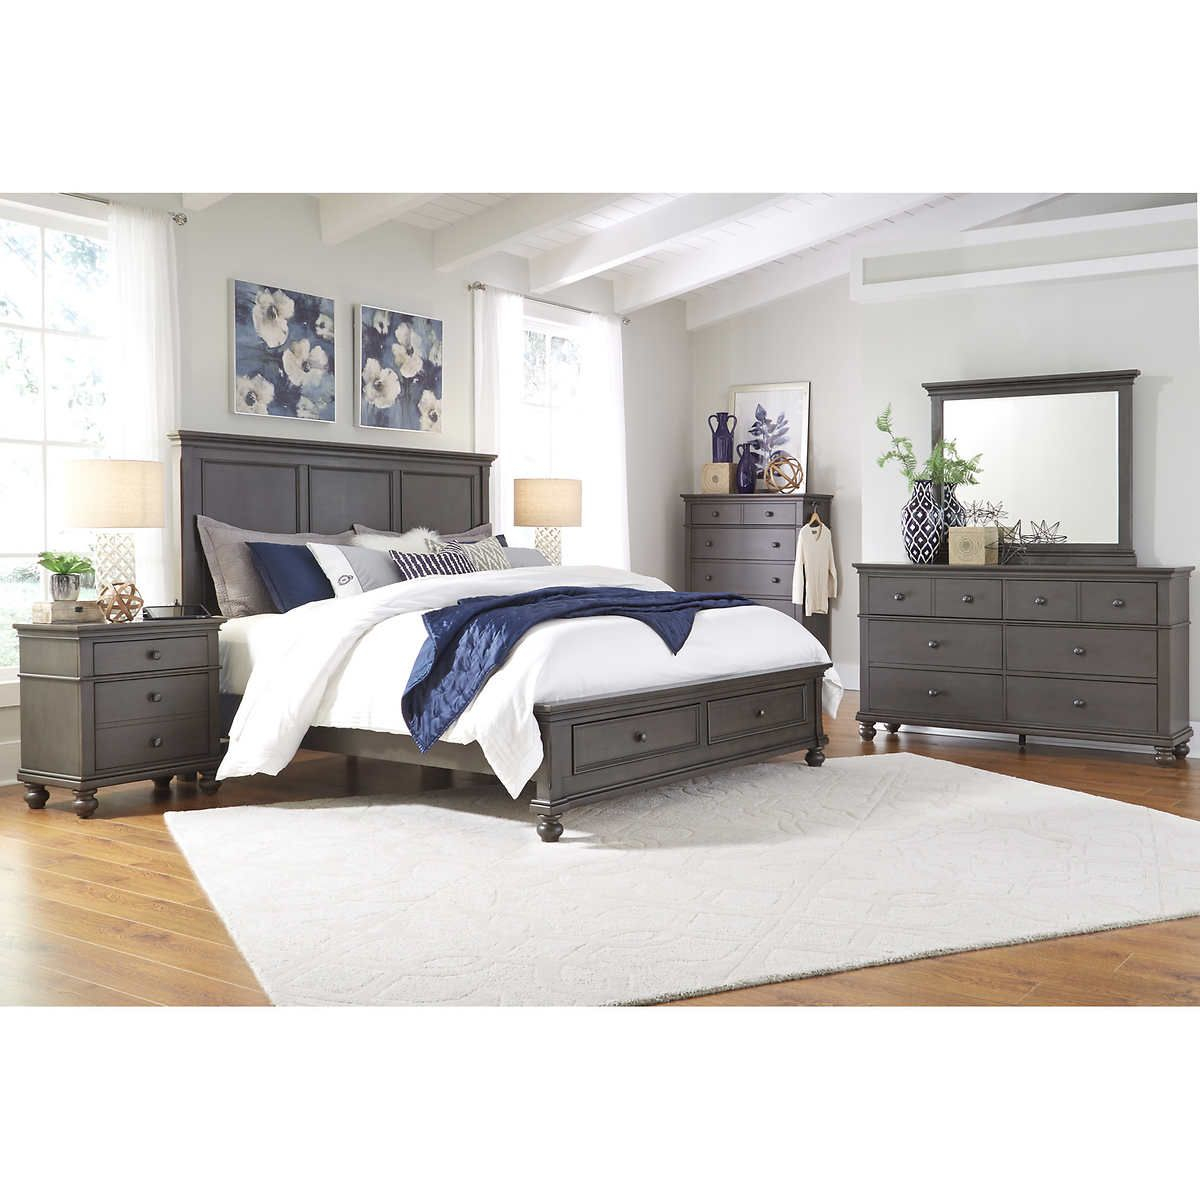 20 Costco Norah Bedroom Set Timhangtot intended for sizing 1200 X 1200